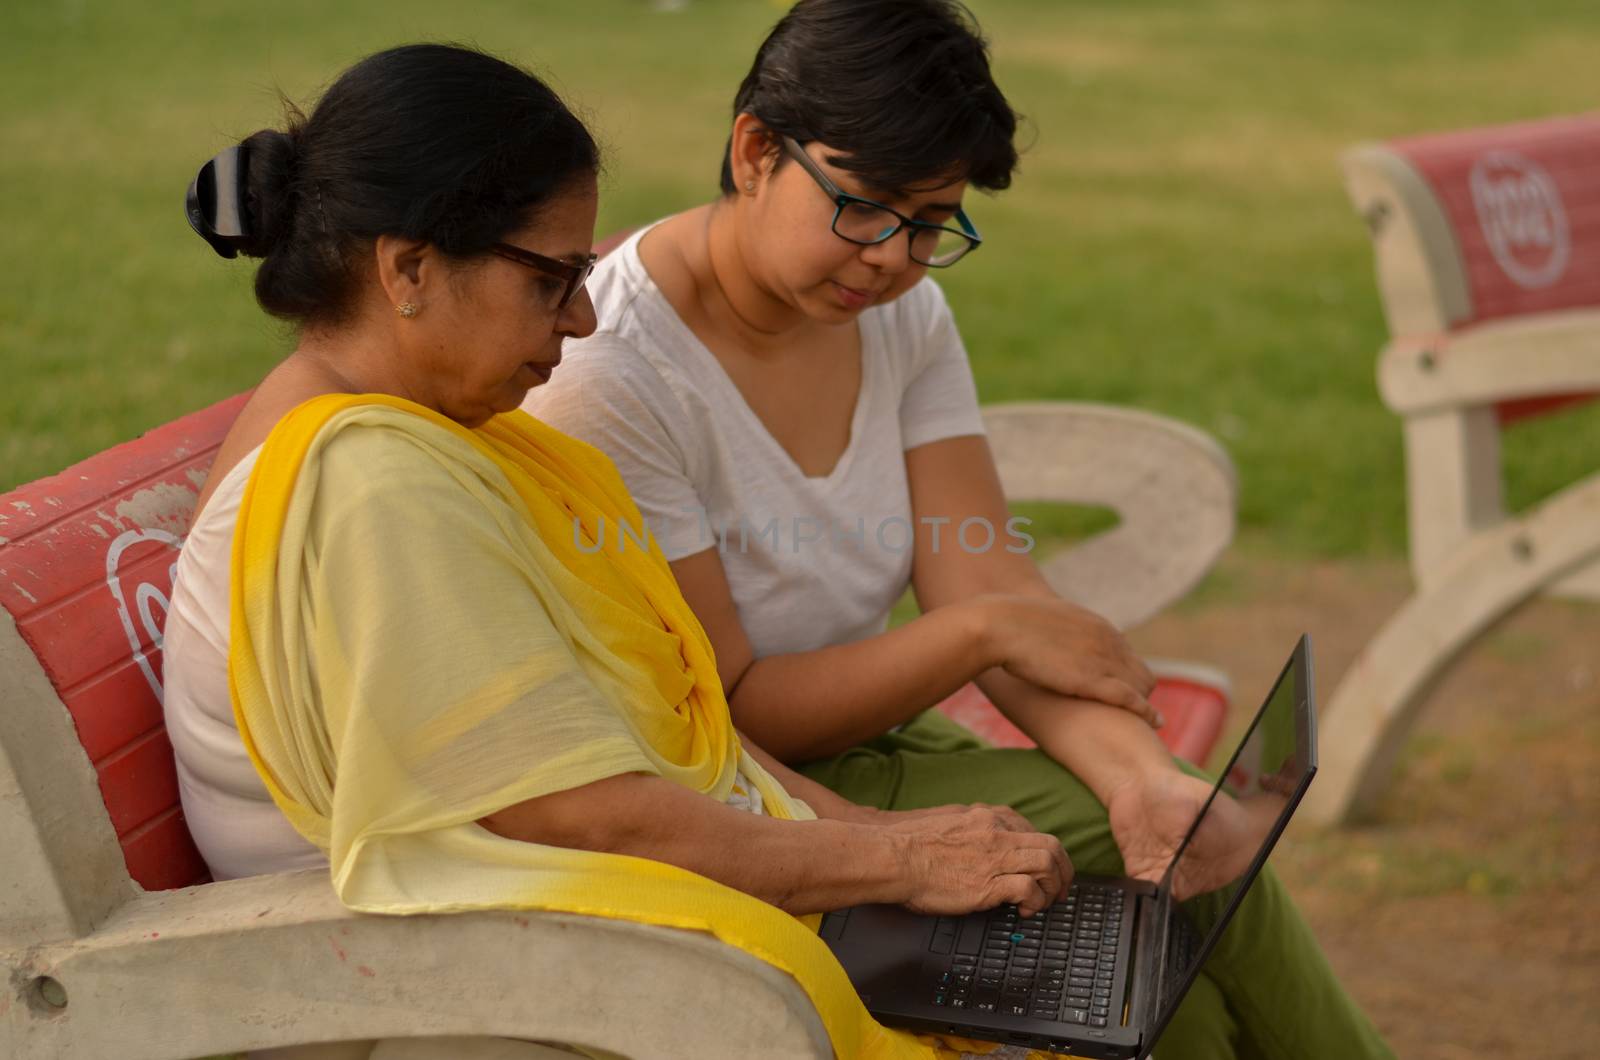 Side view of young Indian girl helping an old Indian woman on a laptop sitting on a red bench in a park in New Delhi, India. Concept Digital literacy / Education